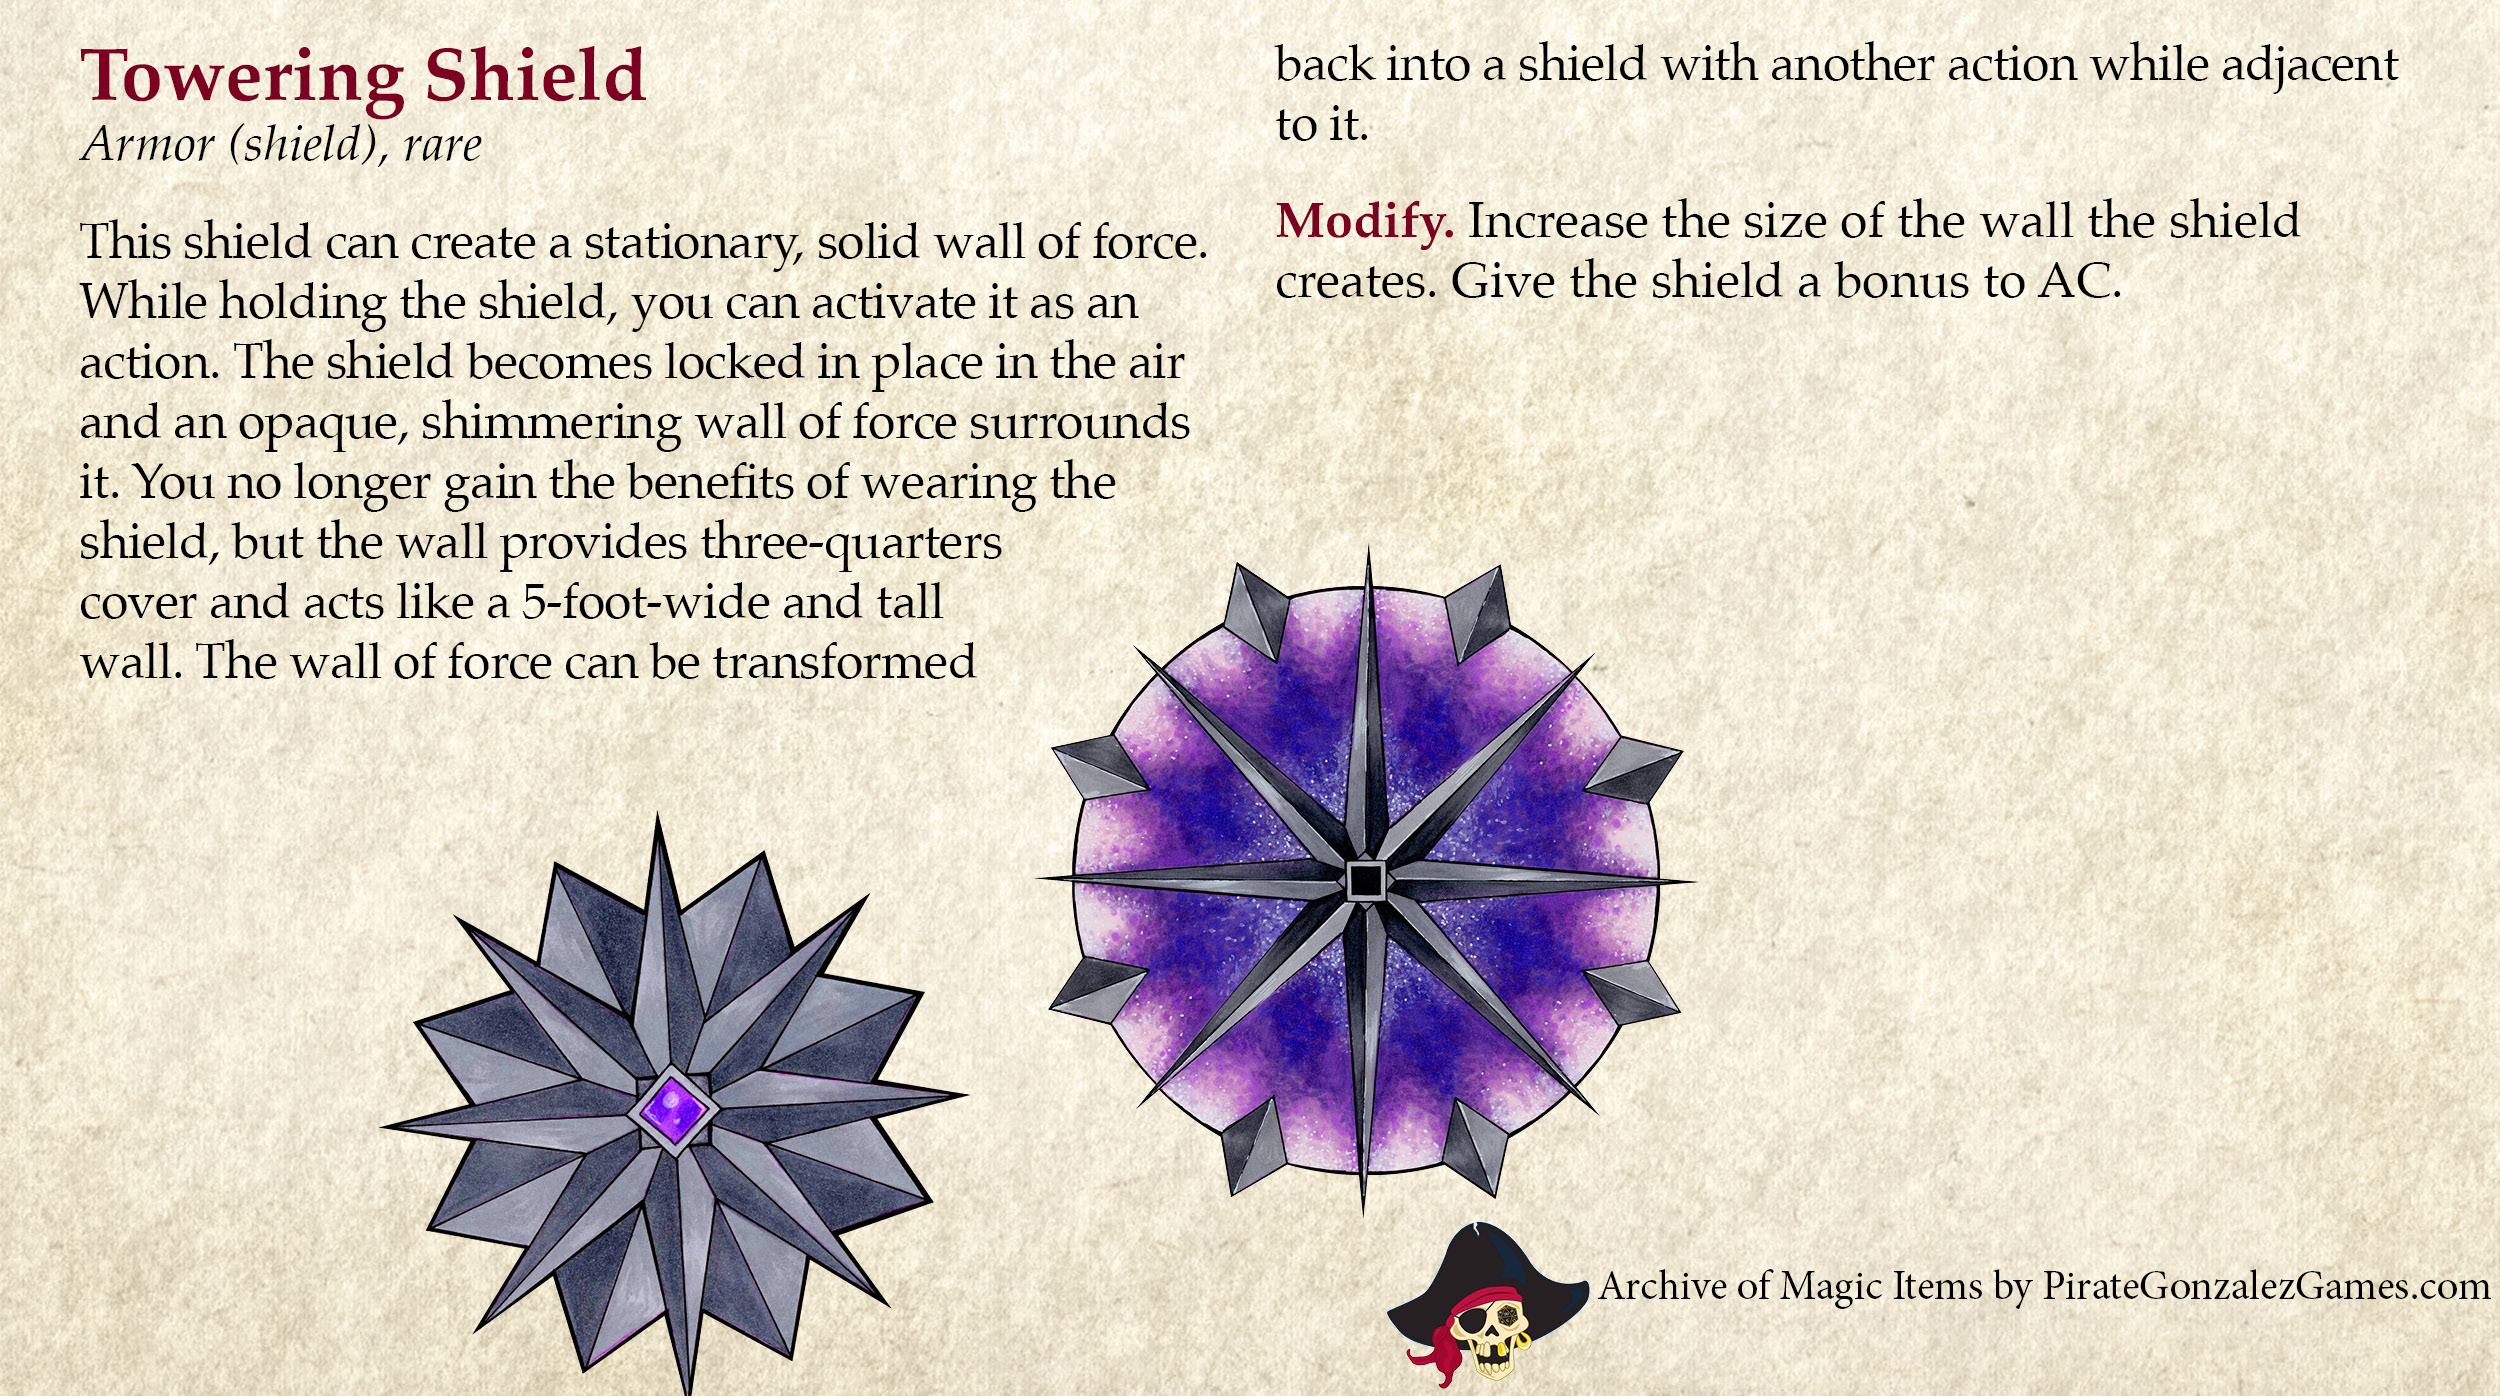 To tell the truth Upward Invest Tim Gonzalez | BEACON RPG on Twitter: "D&amp;D 5e doesn't have a tower  shield, but the magical Towering Shield is a good replacement! #dnd5e  #ArchiveOfMagicItems https://t.co/a2VBx6axPw" / Twitter